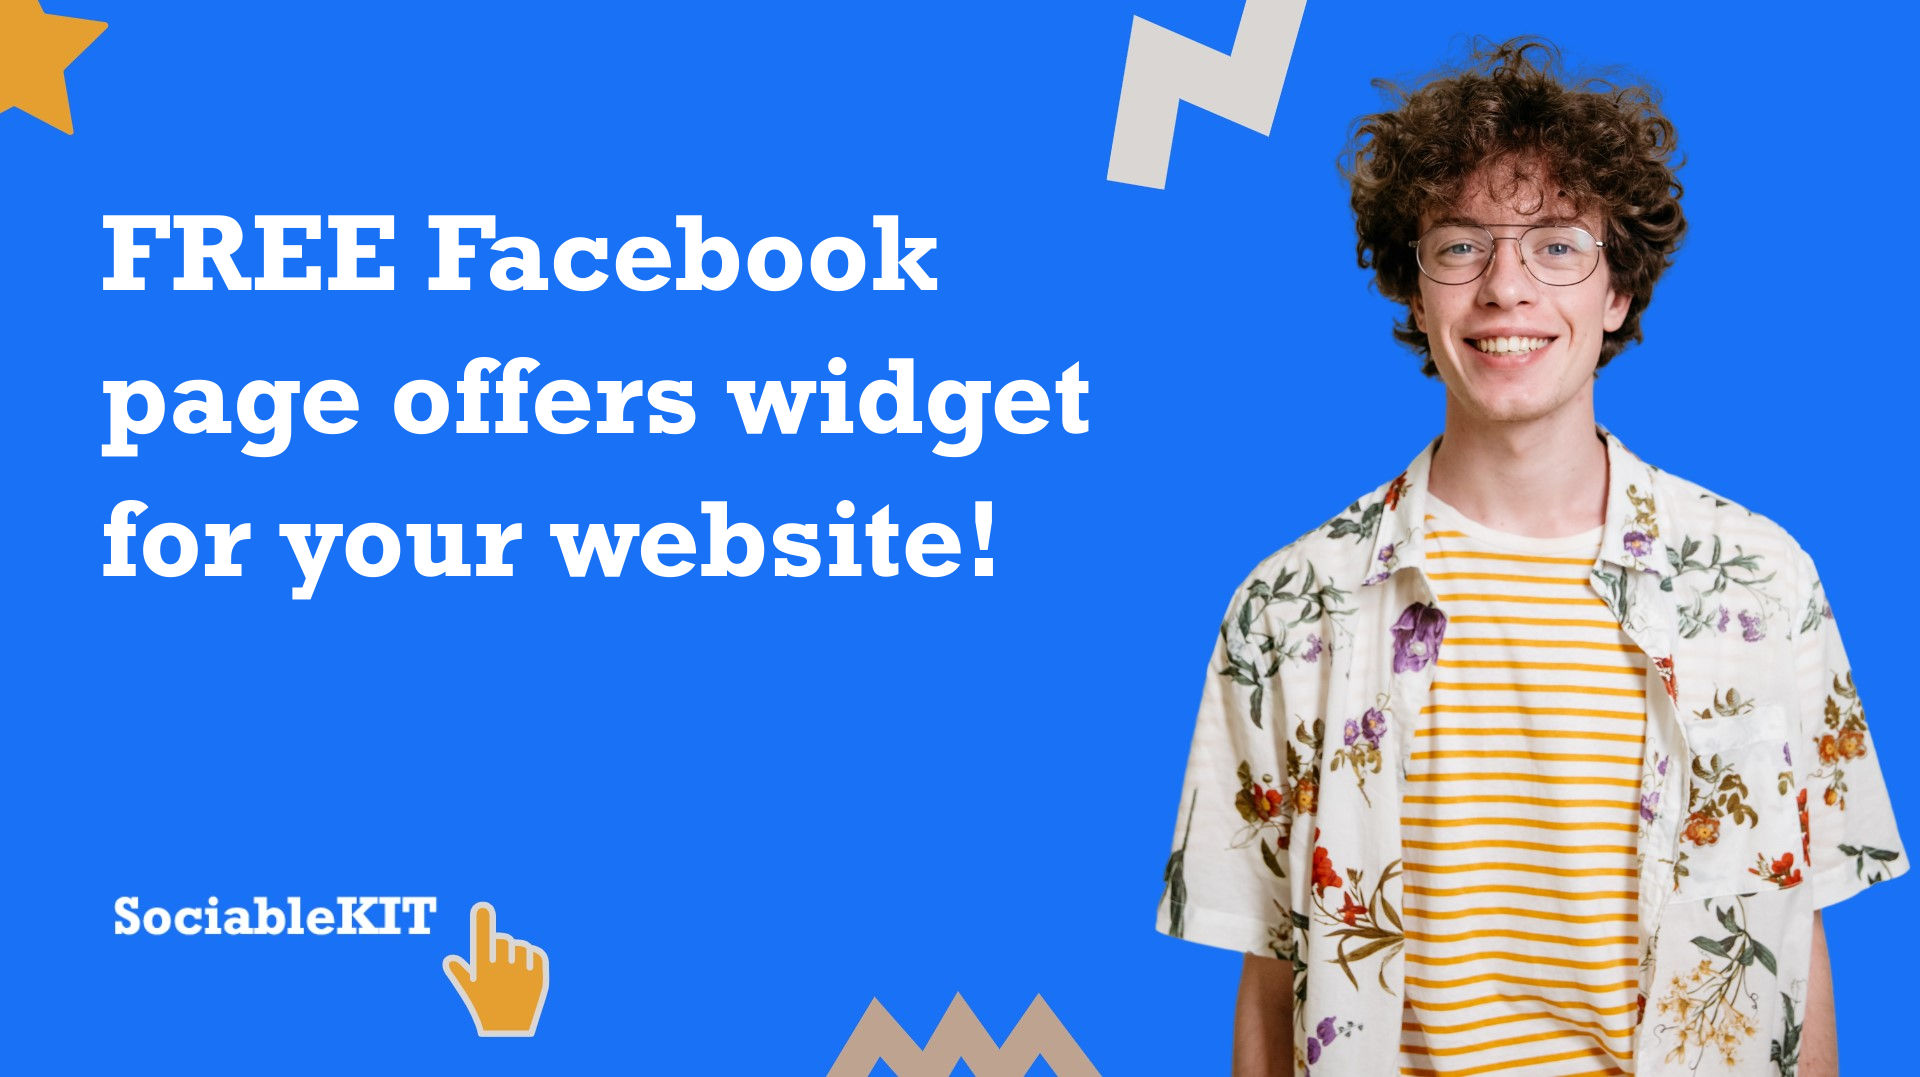 Free Facebook page offers widget for your website